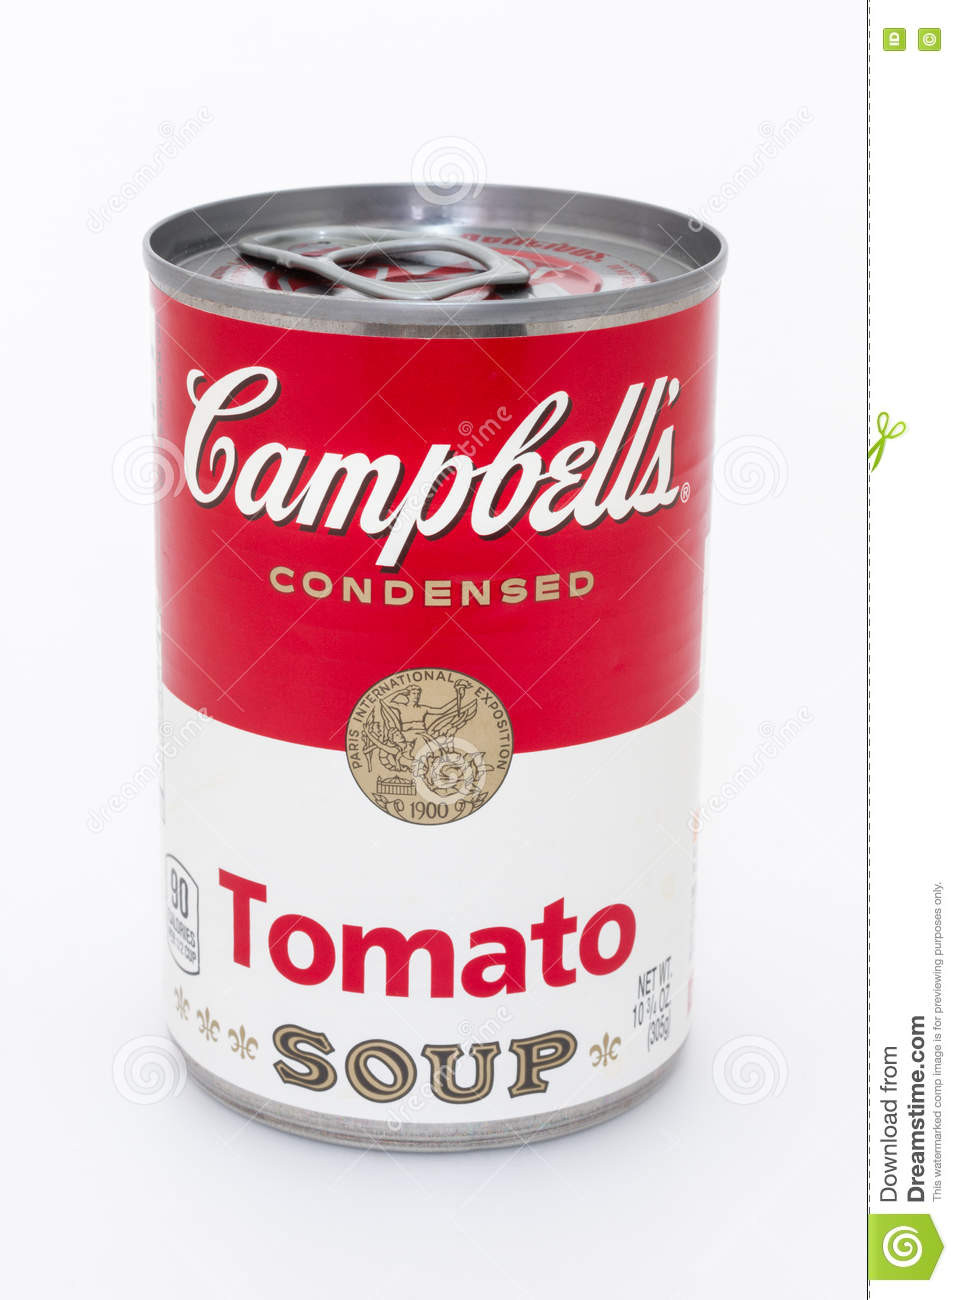 Tomato Soup Can
 Campbell s tomato soup can editorial photography Image of